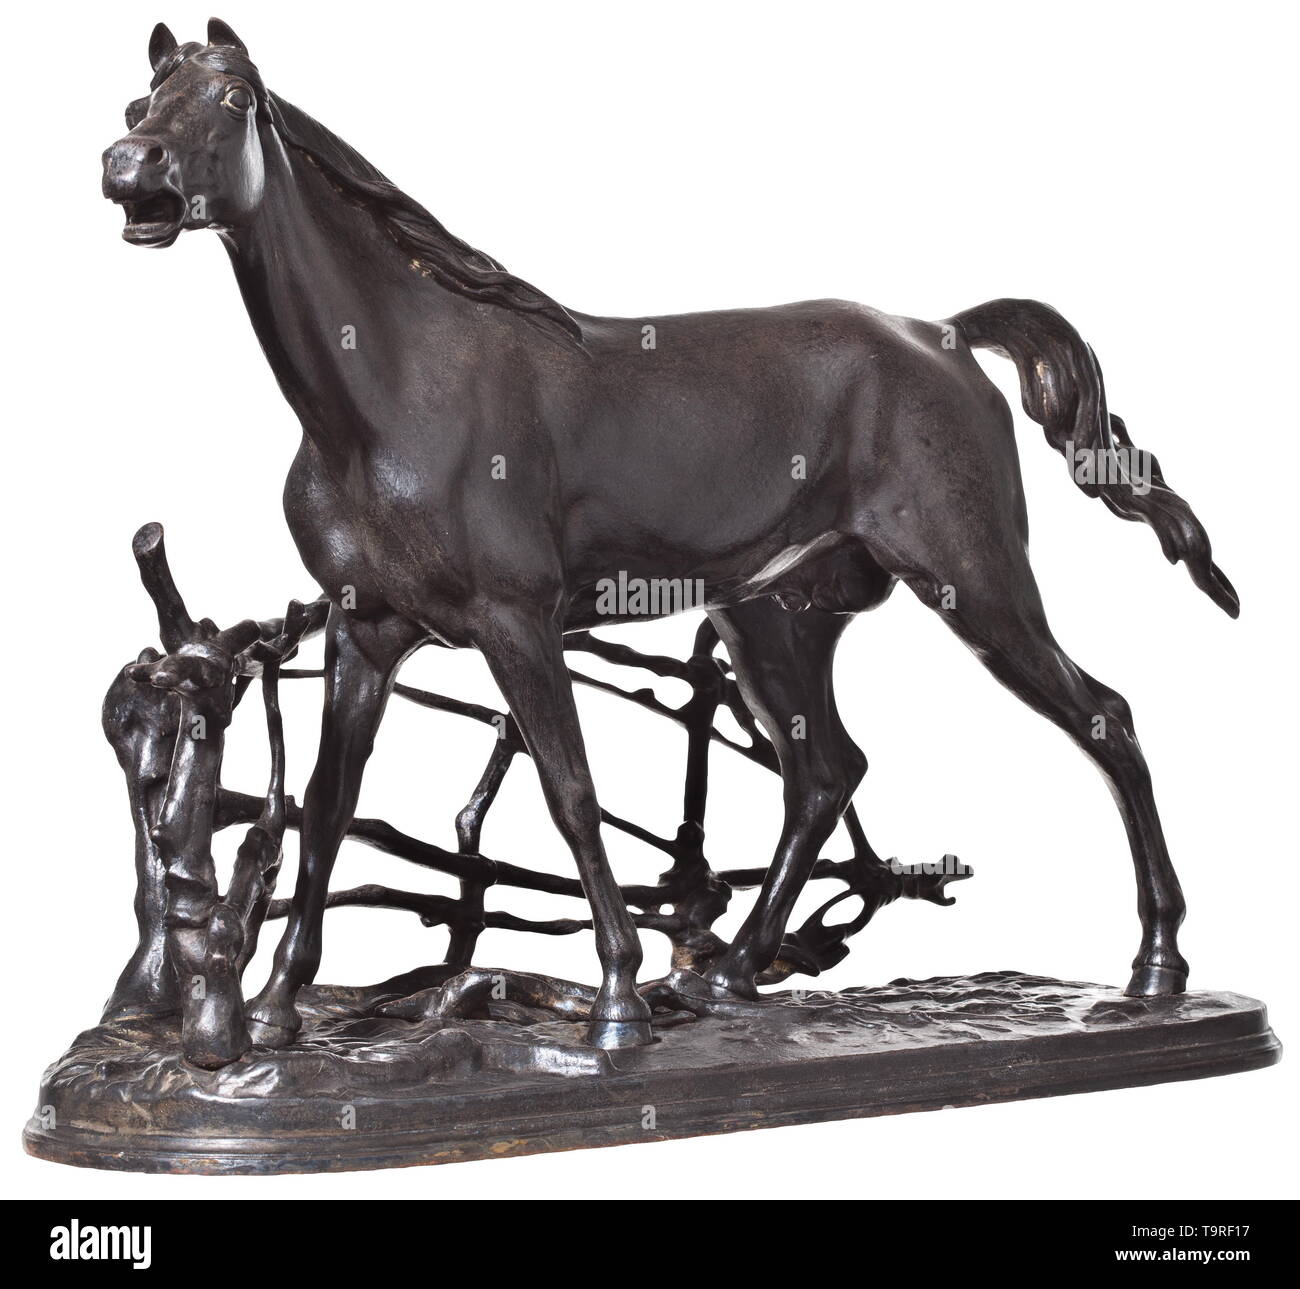 Horse in a paddock - a sculpture after a model by Peter Karlovich Klodt (1805 - 1867), Russia, dated 1908 Black-brown patinated iron cast with the portrayal of a horse in a paddock. Length 42 cm, height 28.5 cm. On the bottom a Russian double-headed eagle with date 1908, manufacturer's mark by the Kaslinsky foundry and founder V. Horoshenin. Excellent condition. historic, historical, 20th century, Additional-Rights-Clearance-Info-Not-Available Stock Photo